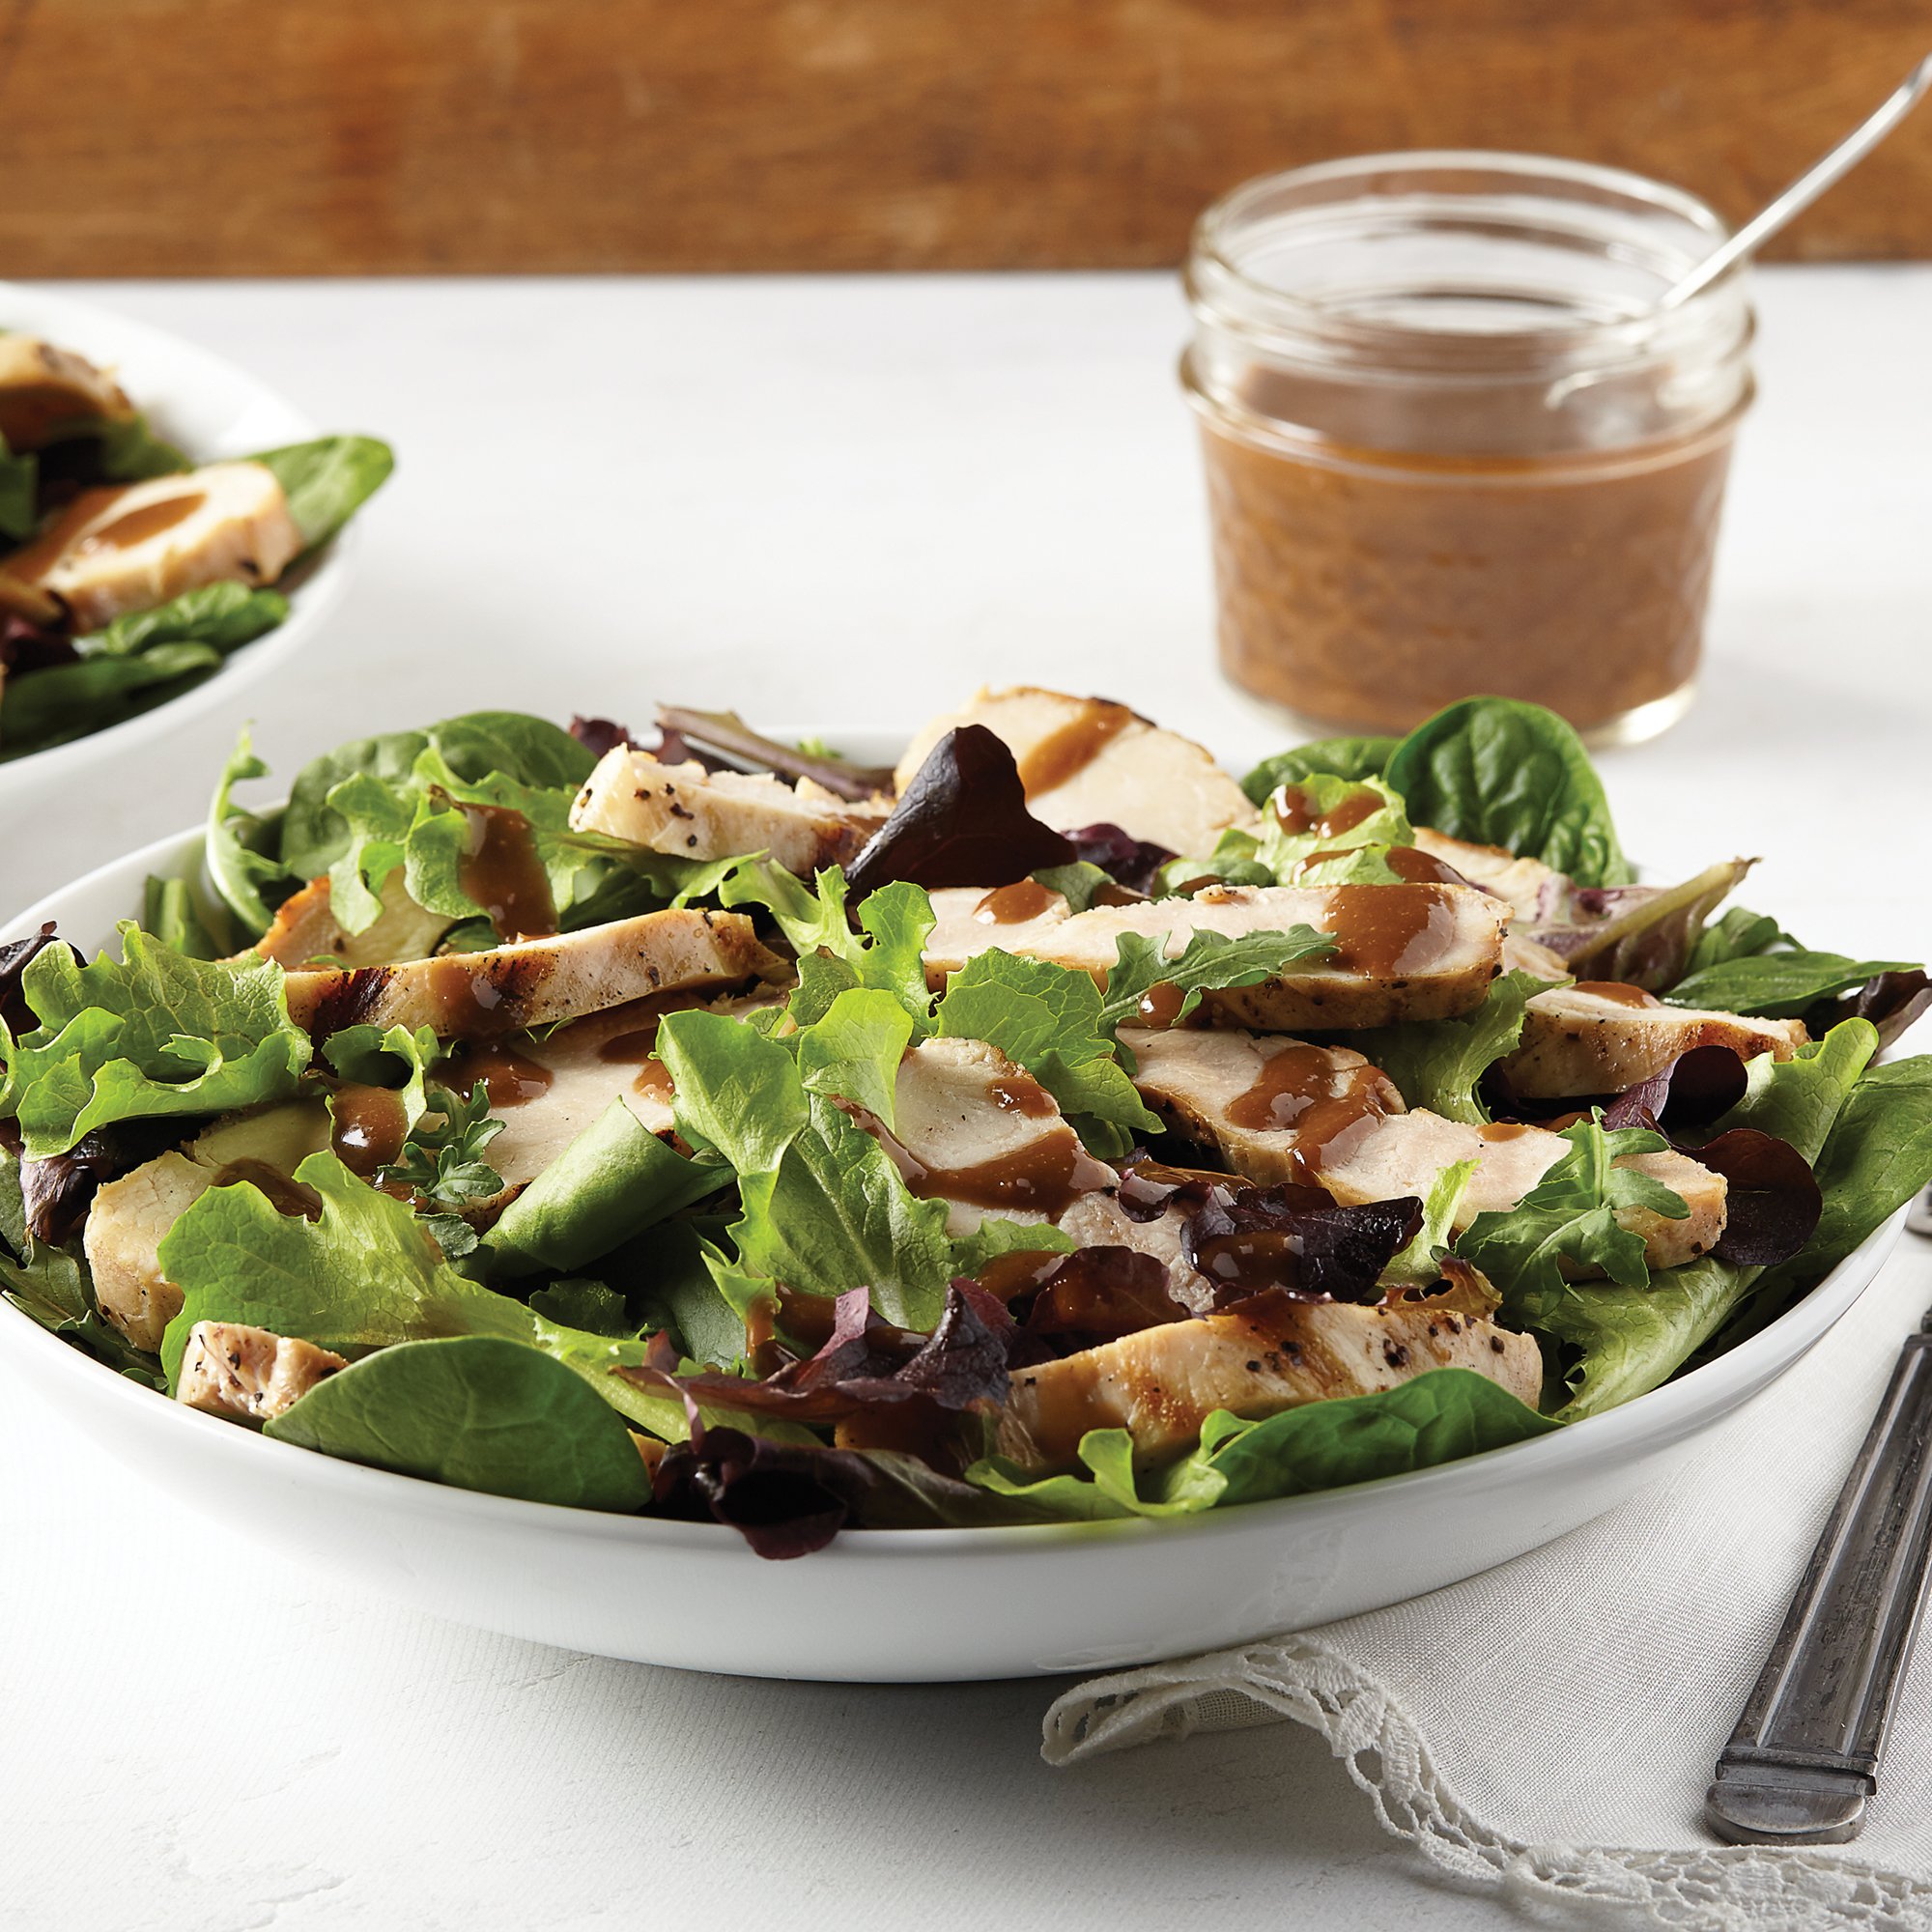 Grilled Chicken Salad with Balsamic Vinaigrette Recipe from H-E-B